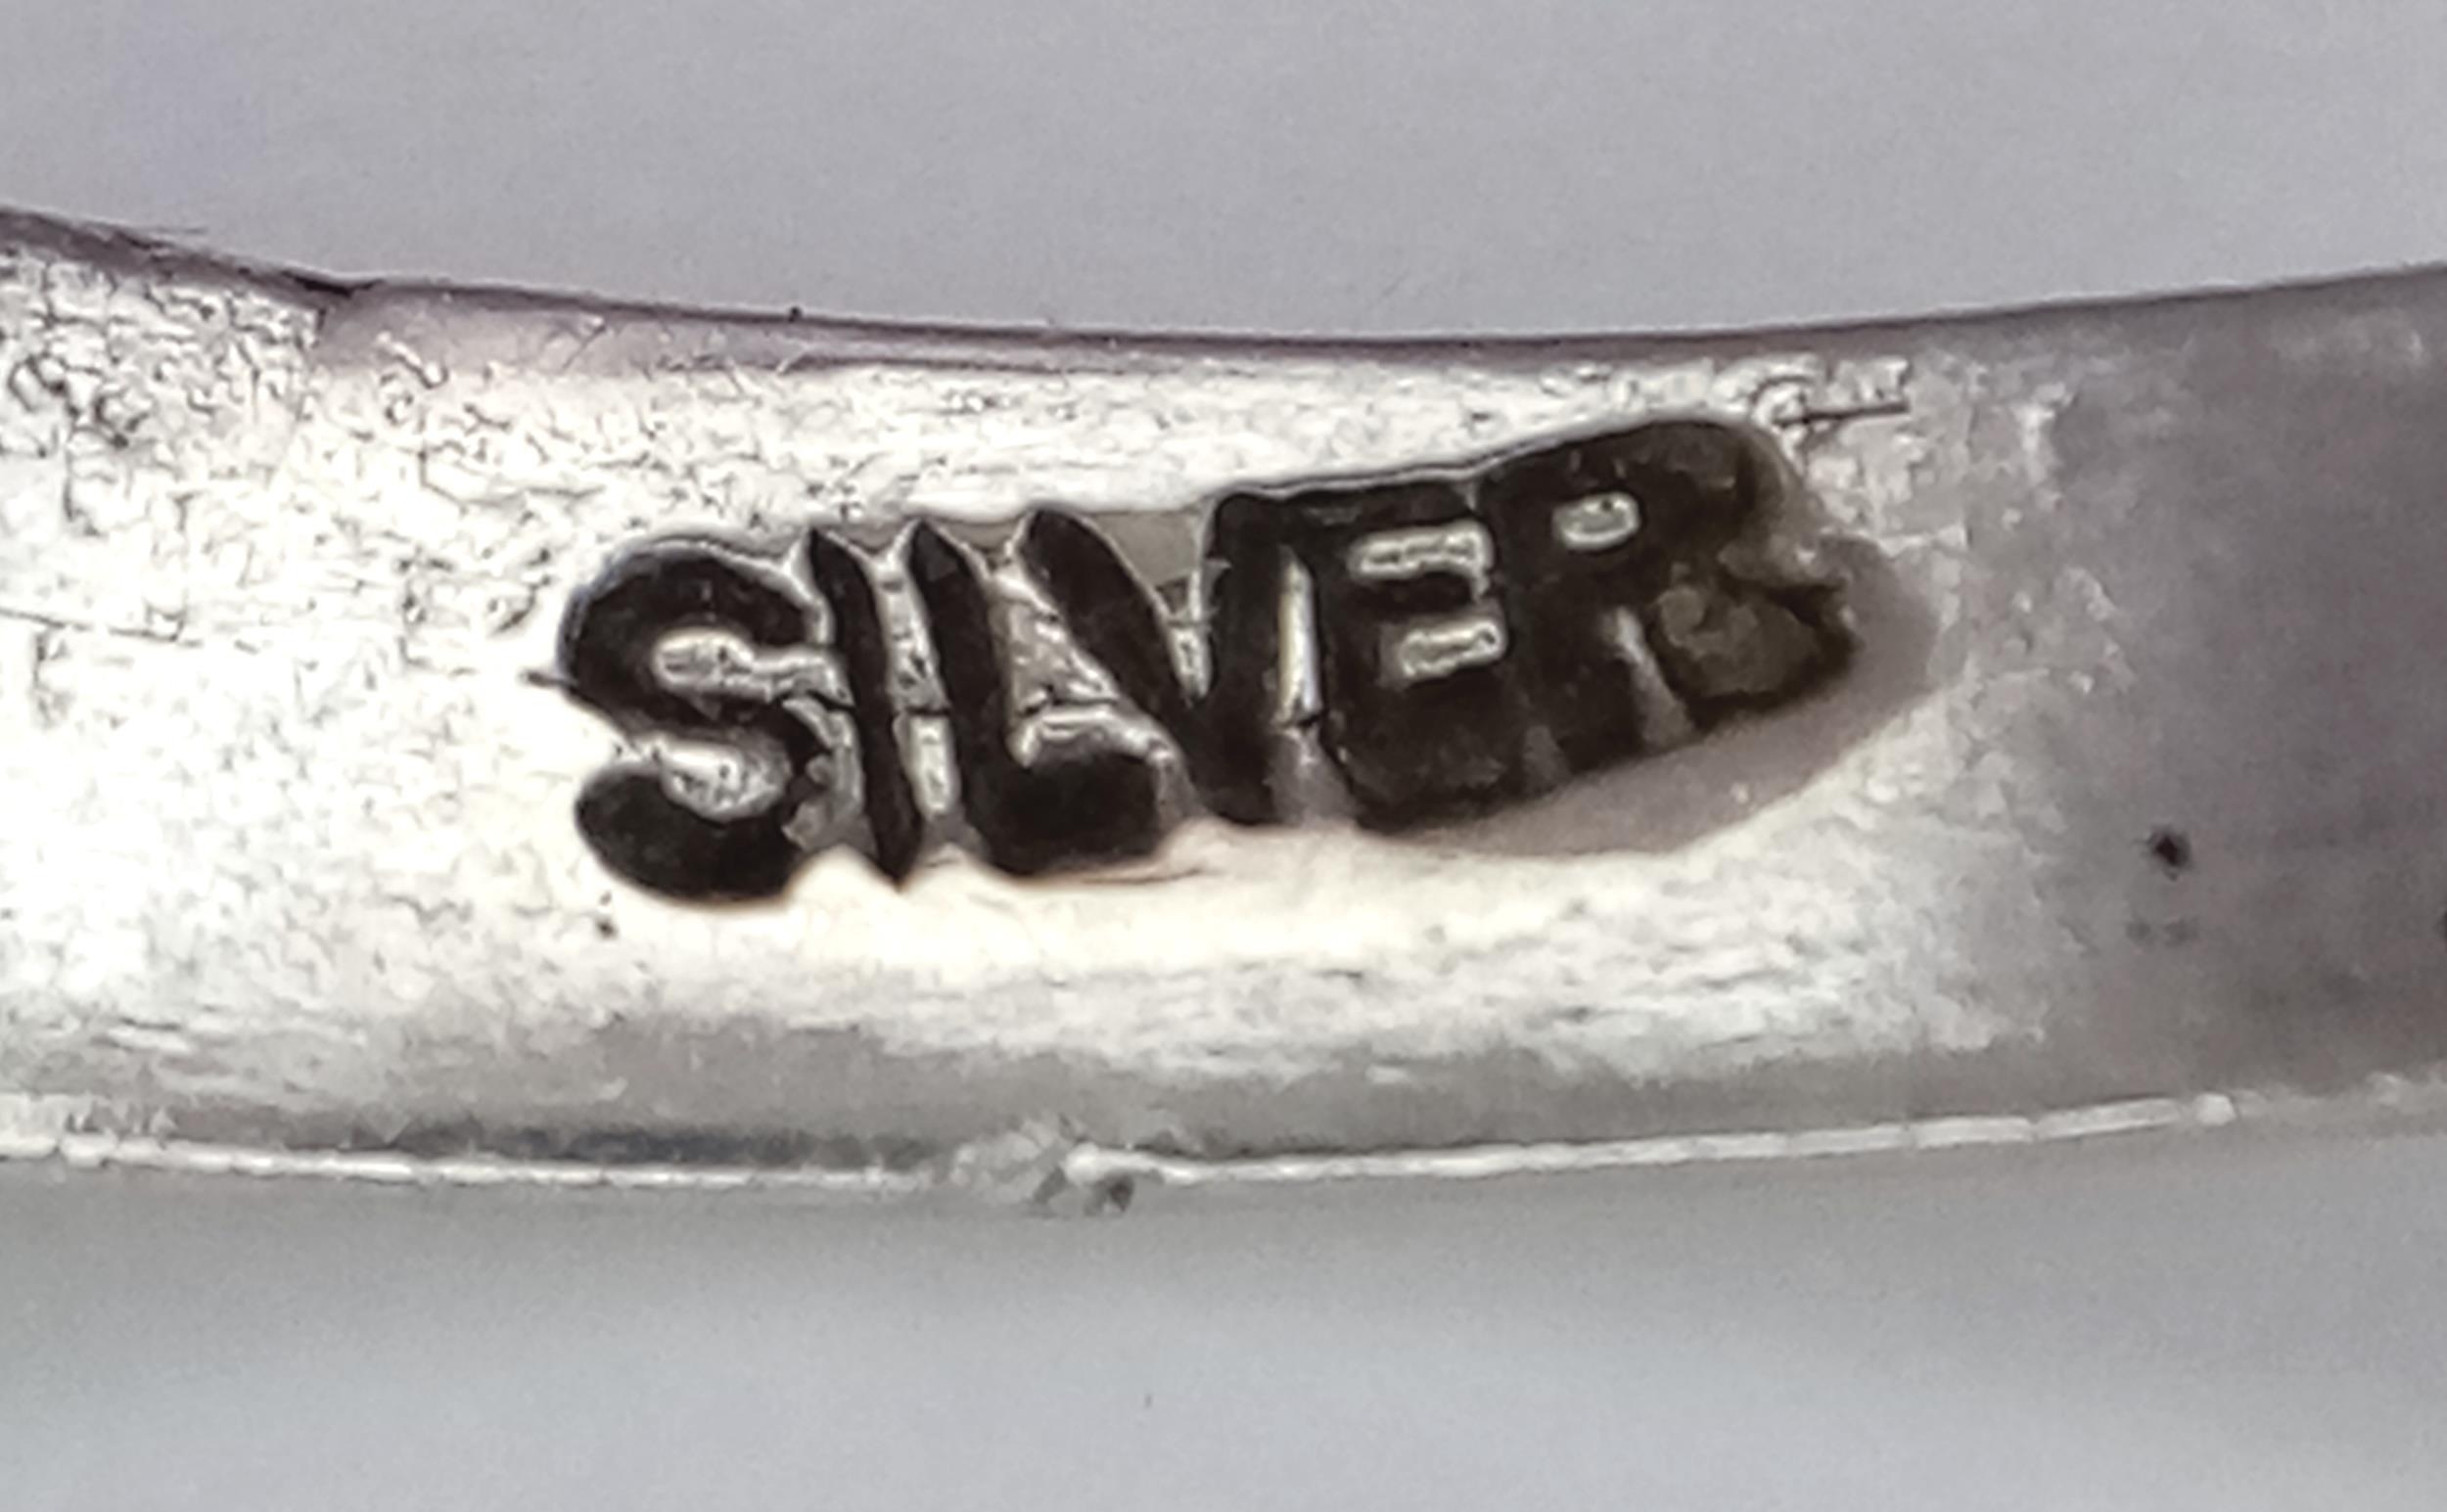 A Very Unique, Vintage or Older, Hand Crafted Grotesque Design Silver Ring Size T. Crown measures - Image 5 of 5